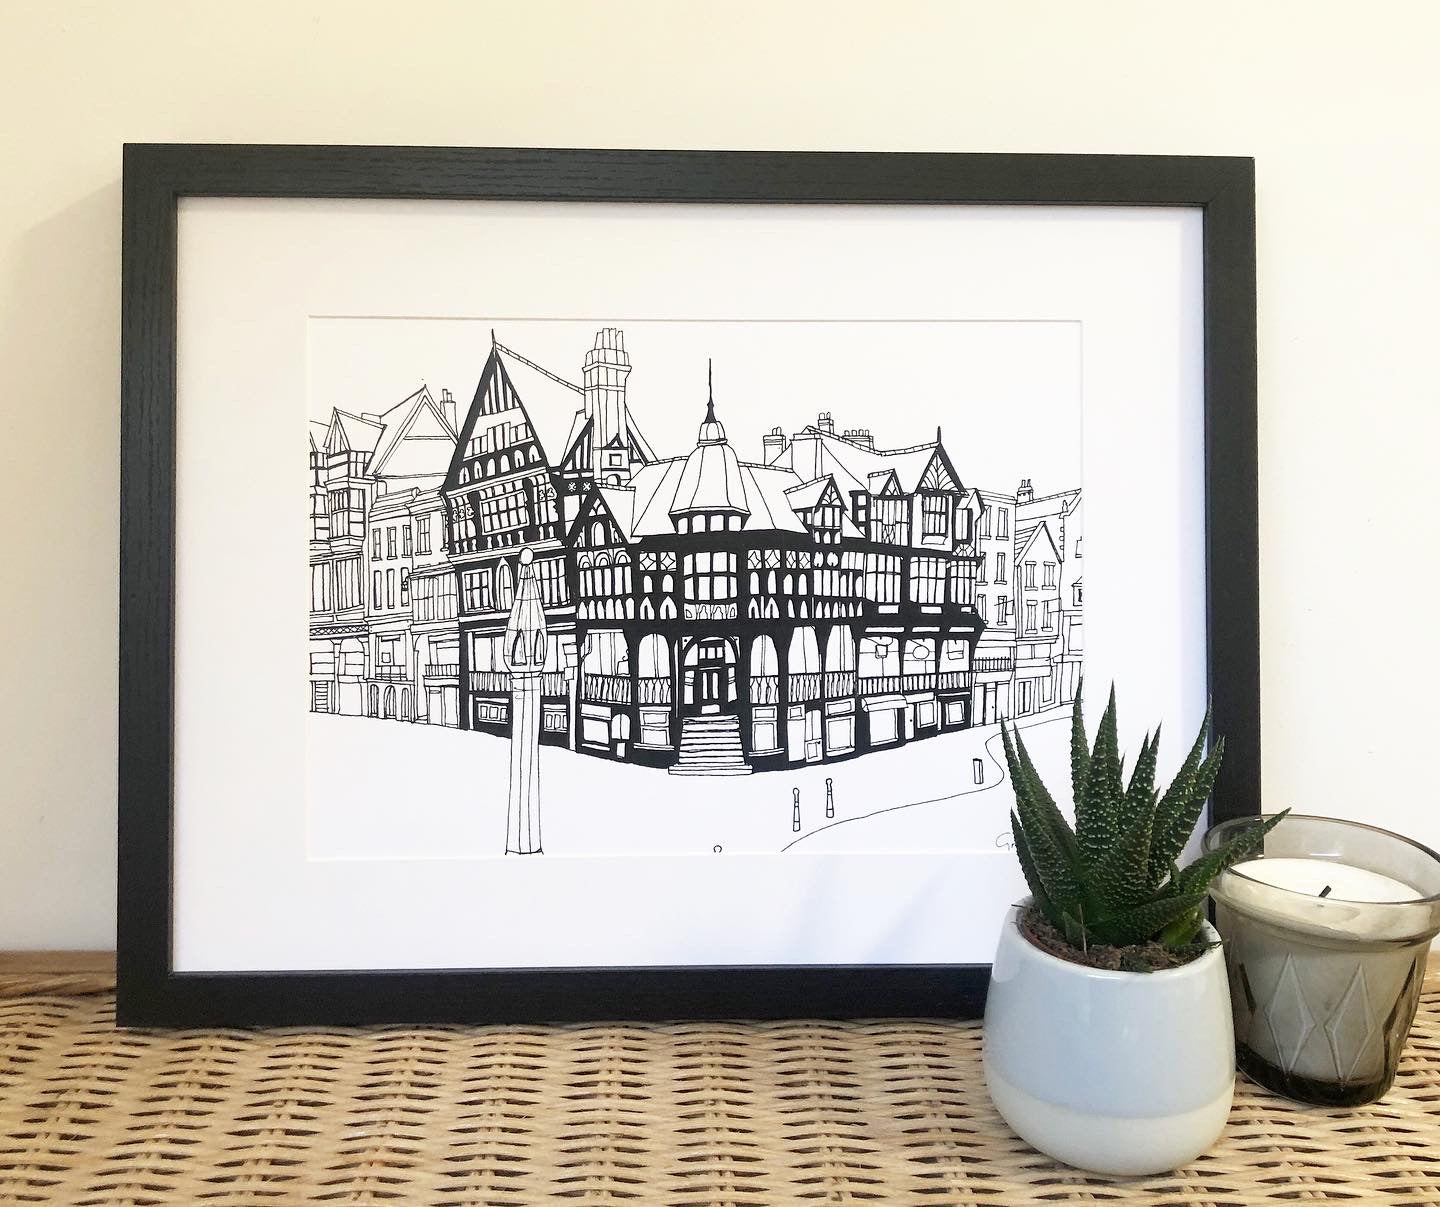 Chester Rows Print